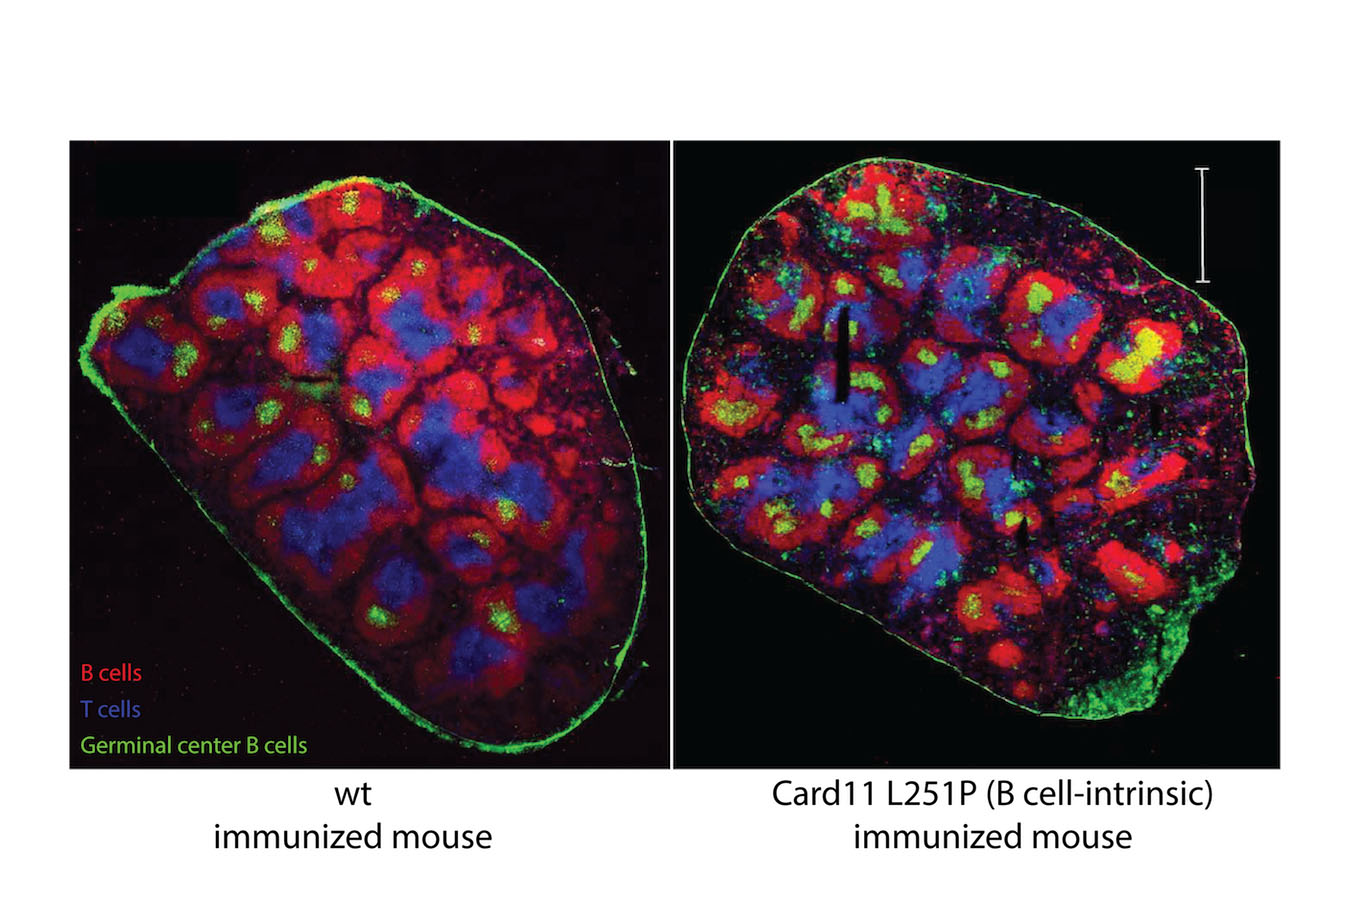 Imaging showing B cells, T cells, and Germinal center B cells of wt immunized mouse and Card11 L251P immunized mouse